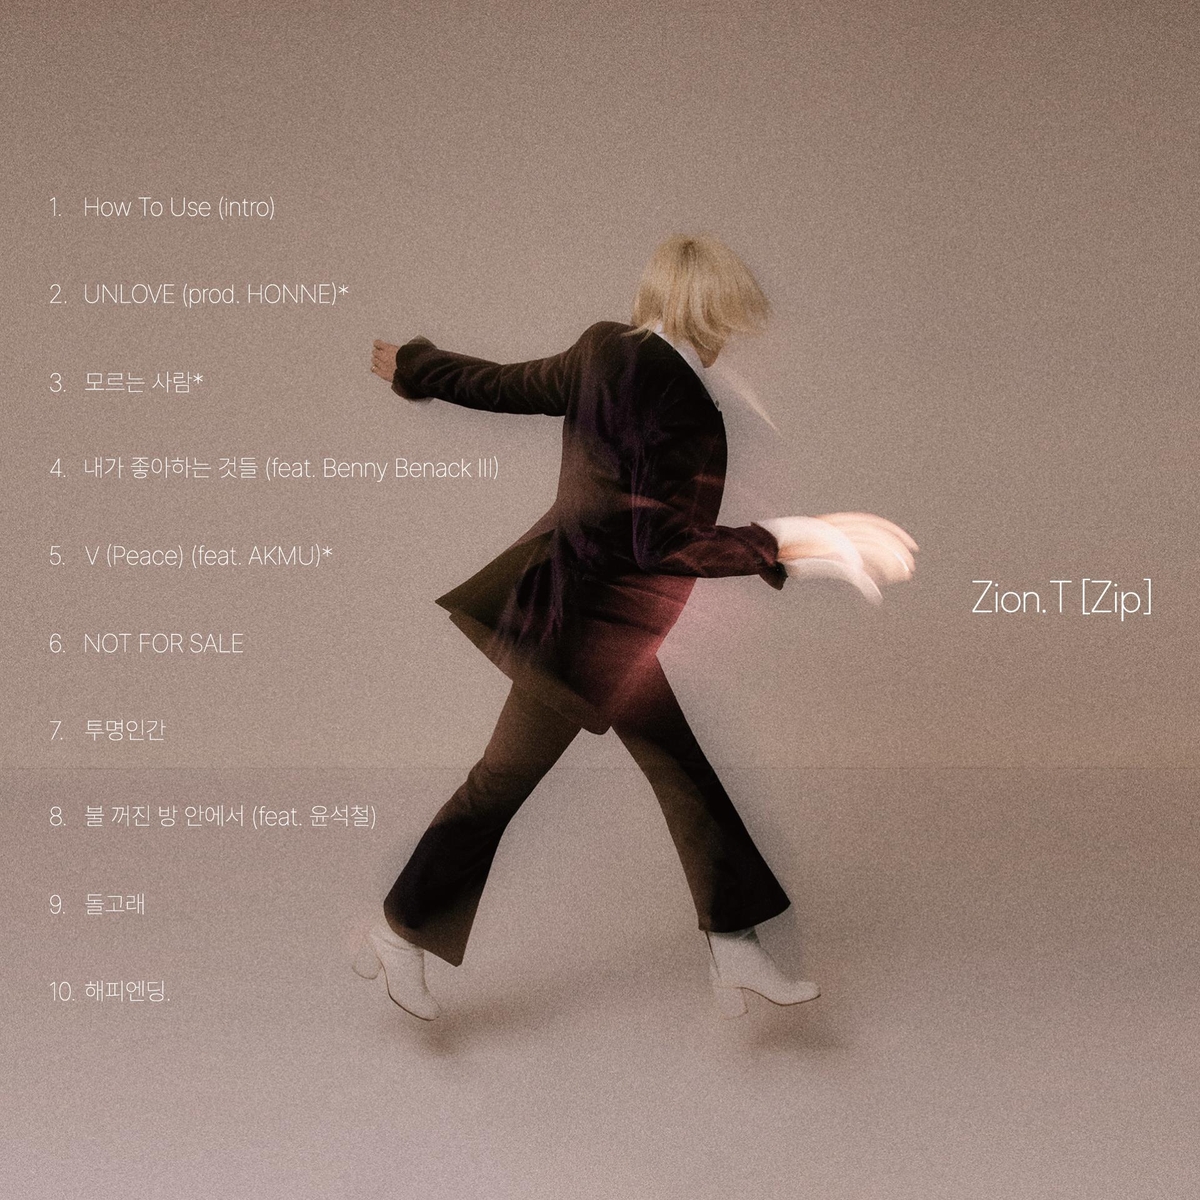 This image provided by The Black Label shows the track list of K-pop singer-songwriter and producer Zion.T's third studio album, "Zip." (PHOTO NOT FOR SALE) (Yonhap)